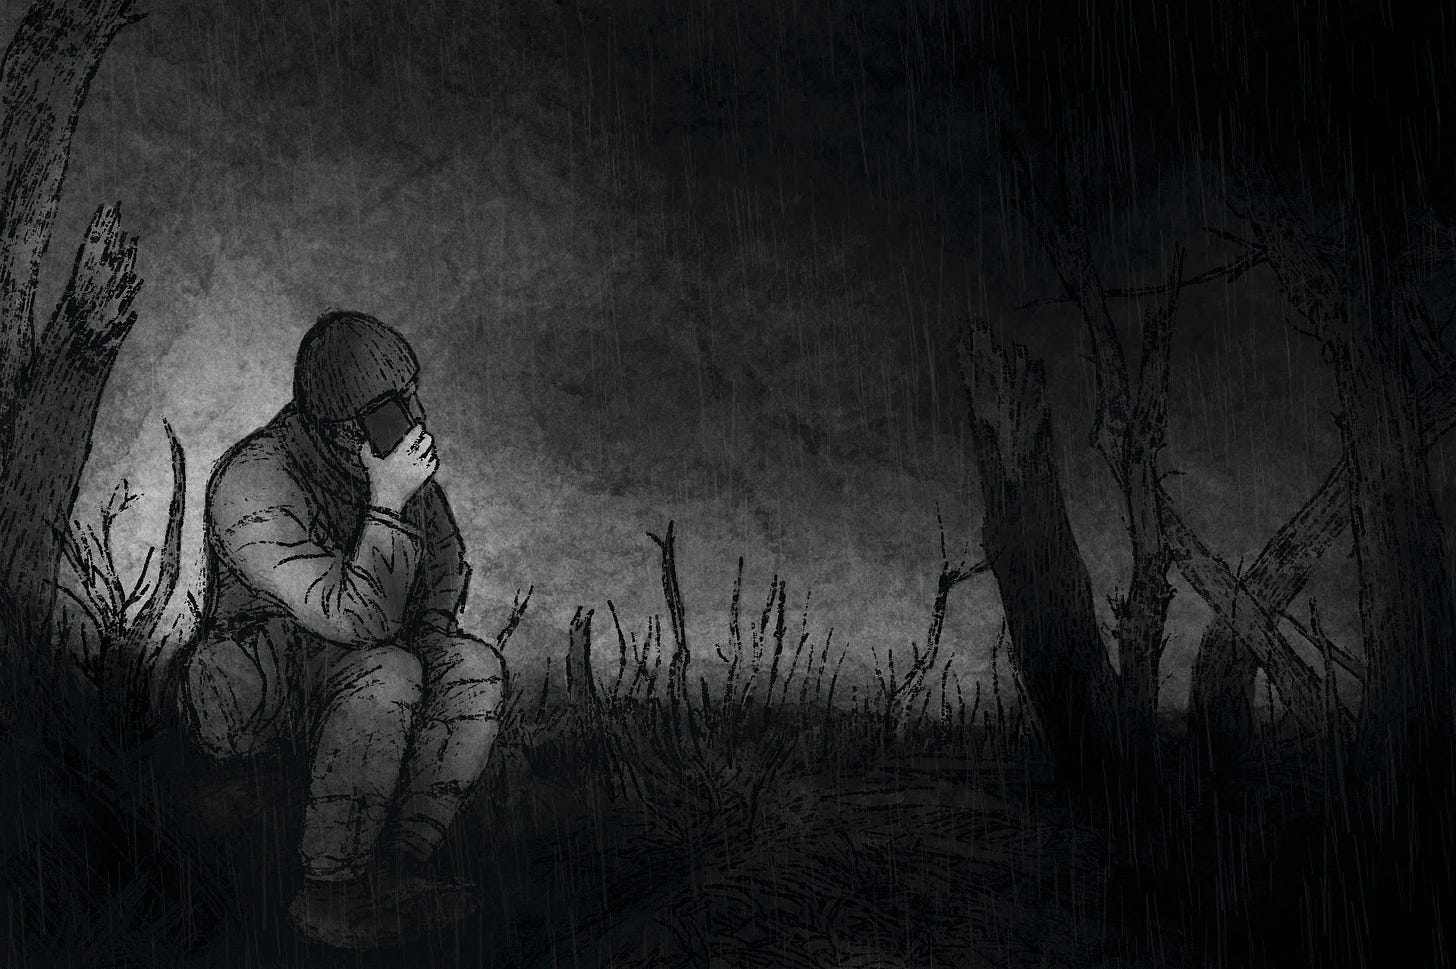 An illustration of a Russian soldier on the phone.